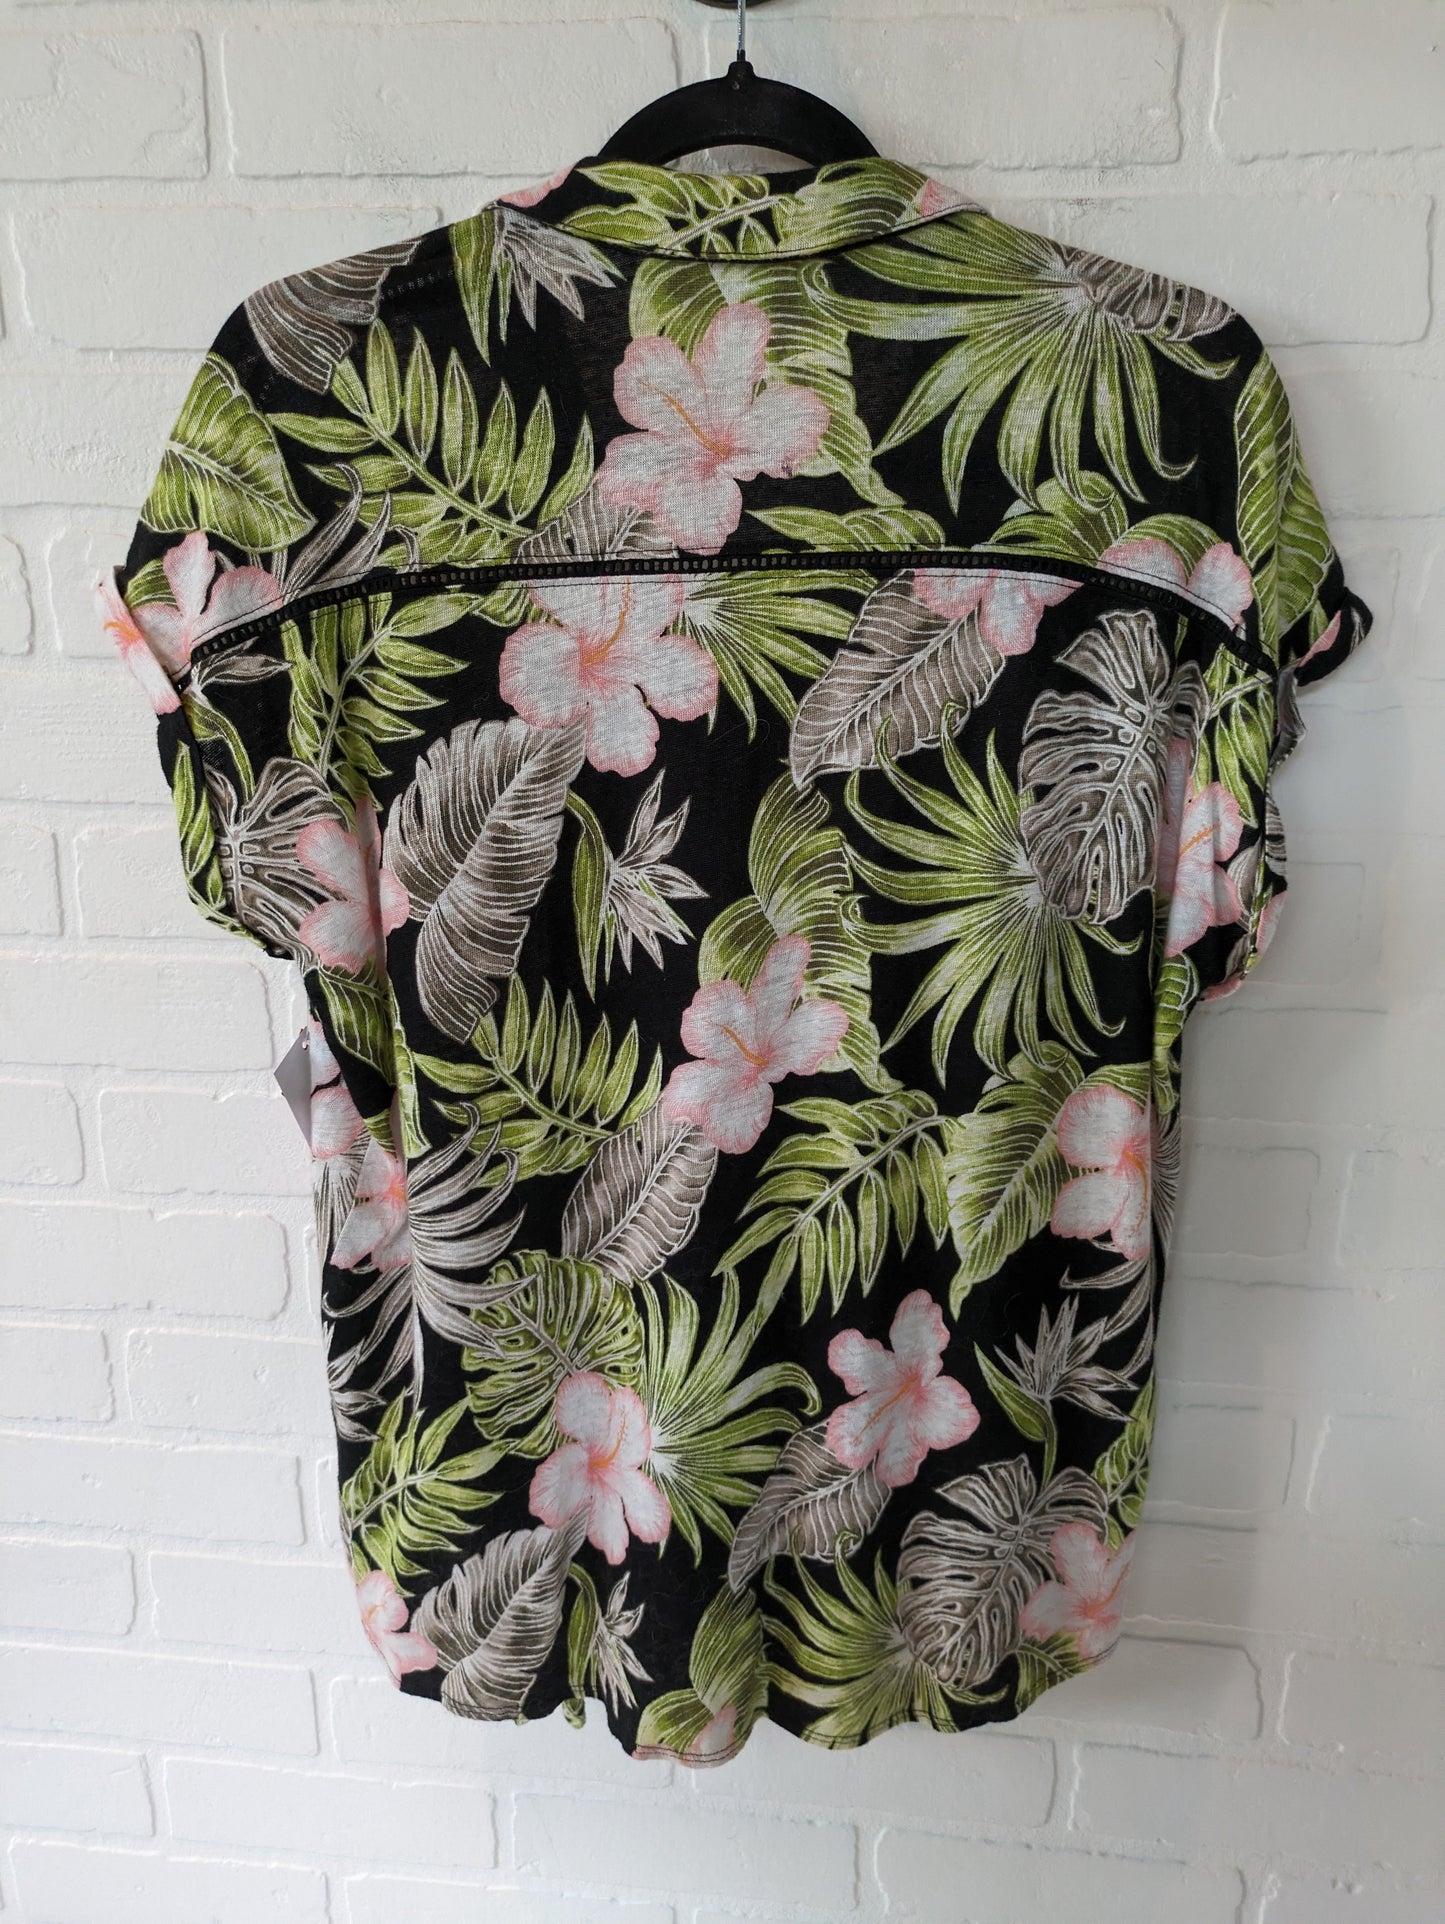 Floral Print Top Short Sleeve Tommy Bahama, Size M